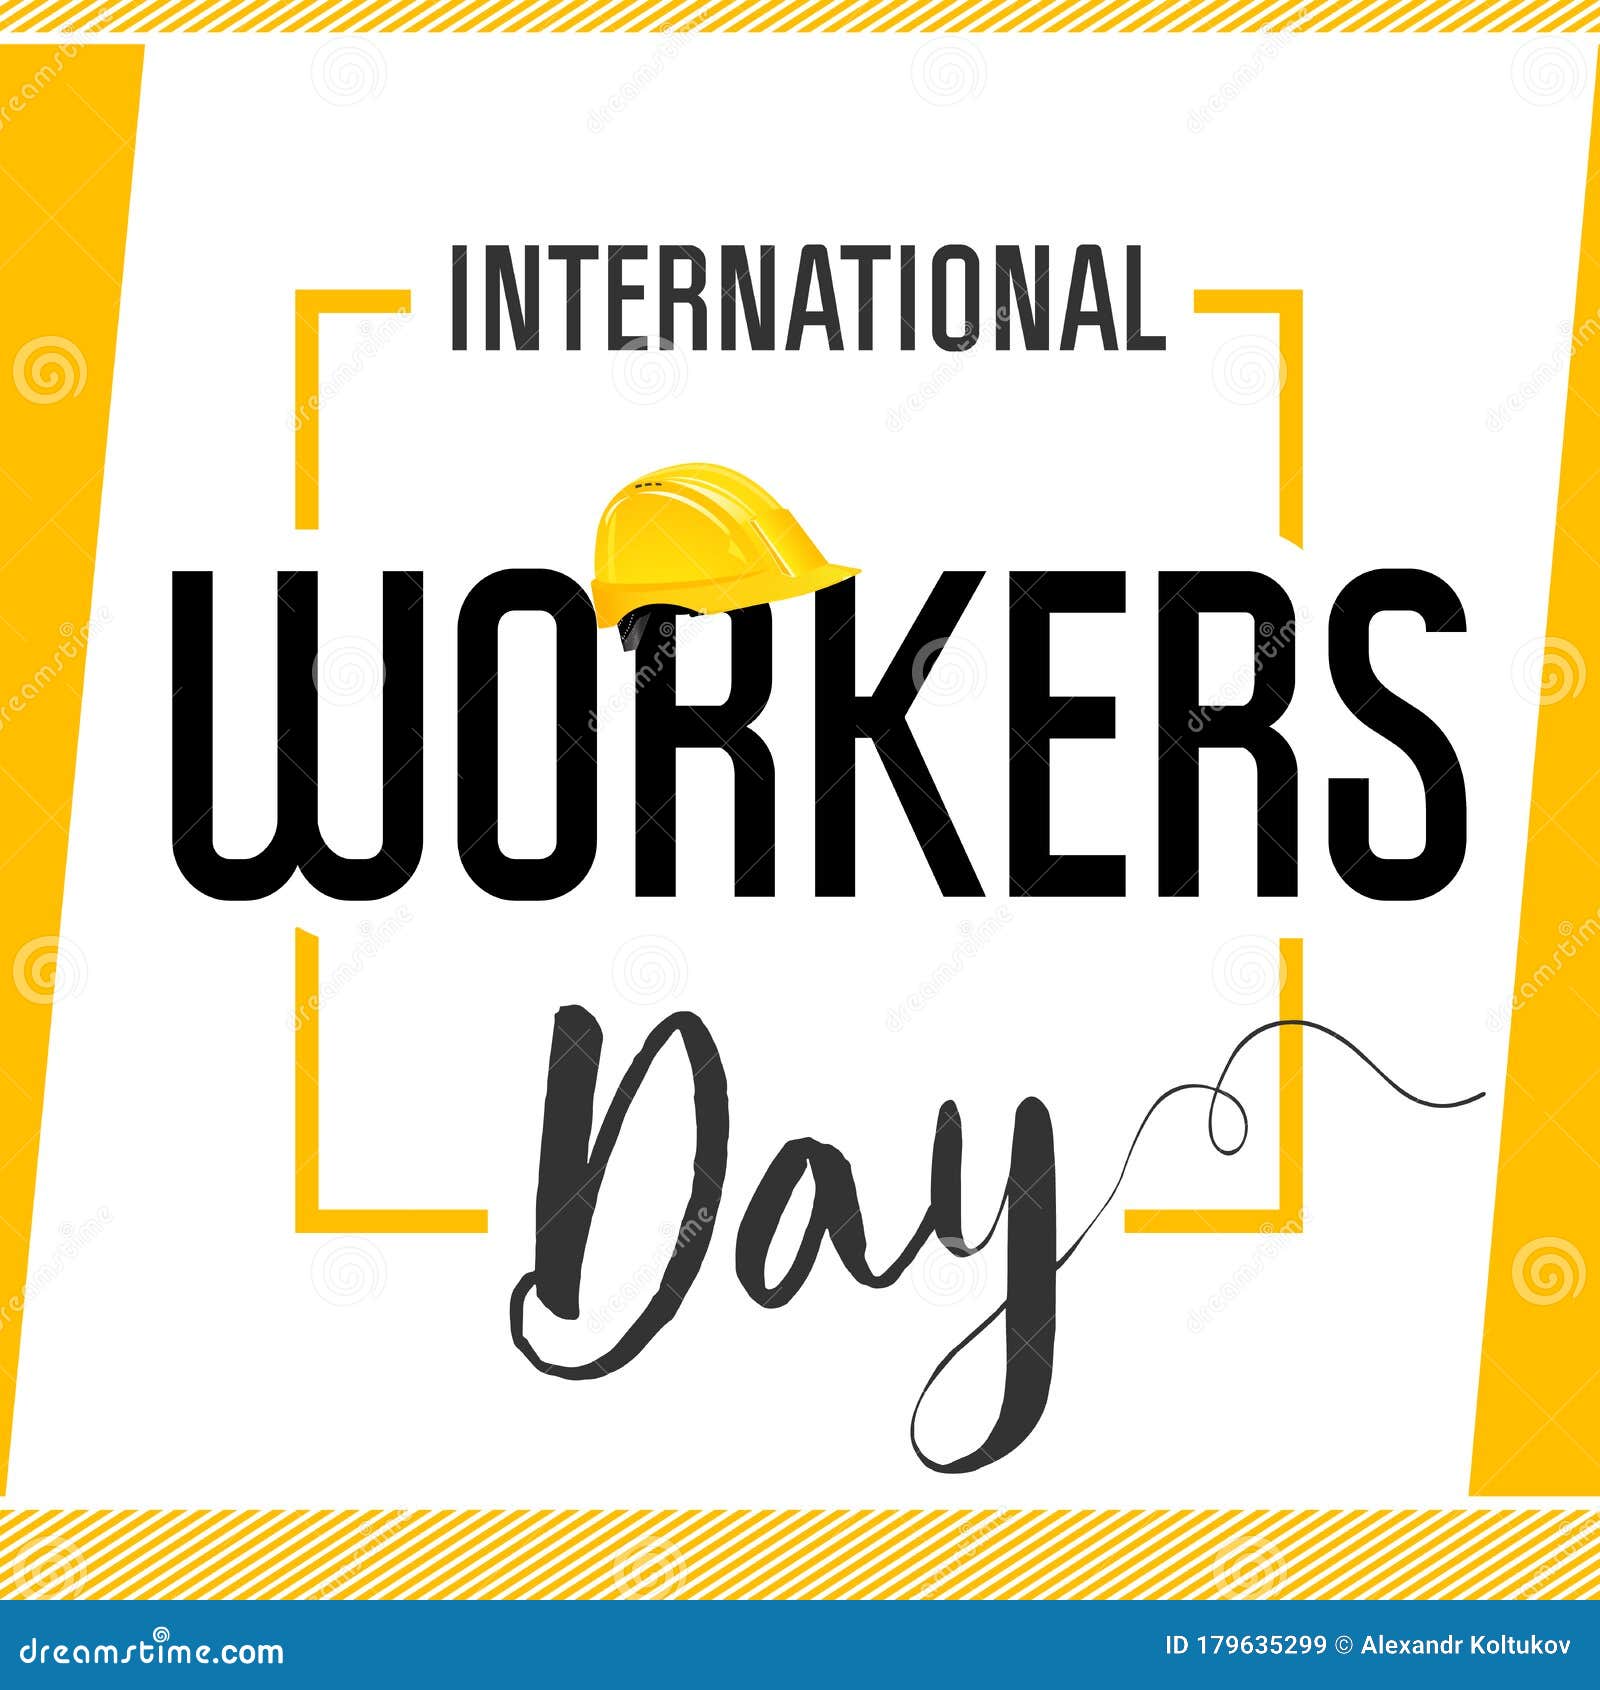 International Workers Day Card, 1 May Stock Vector Illustration of